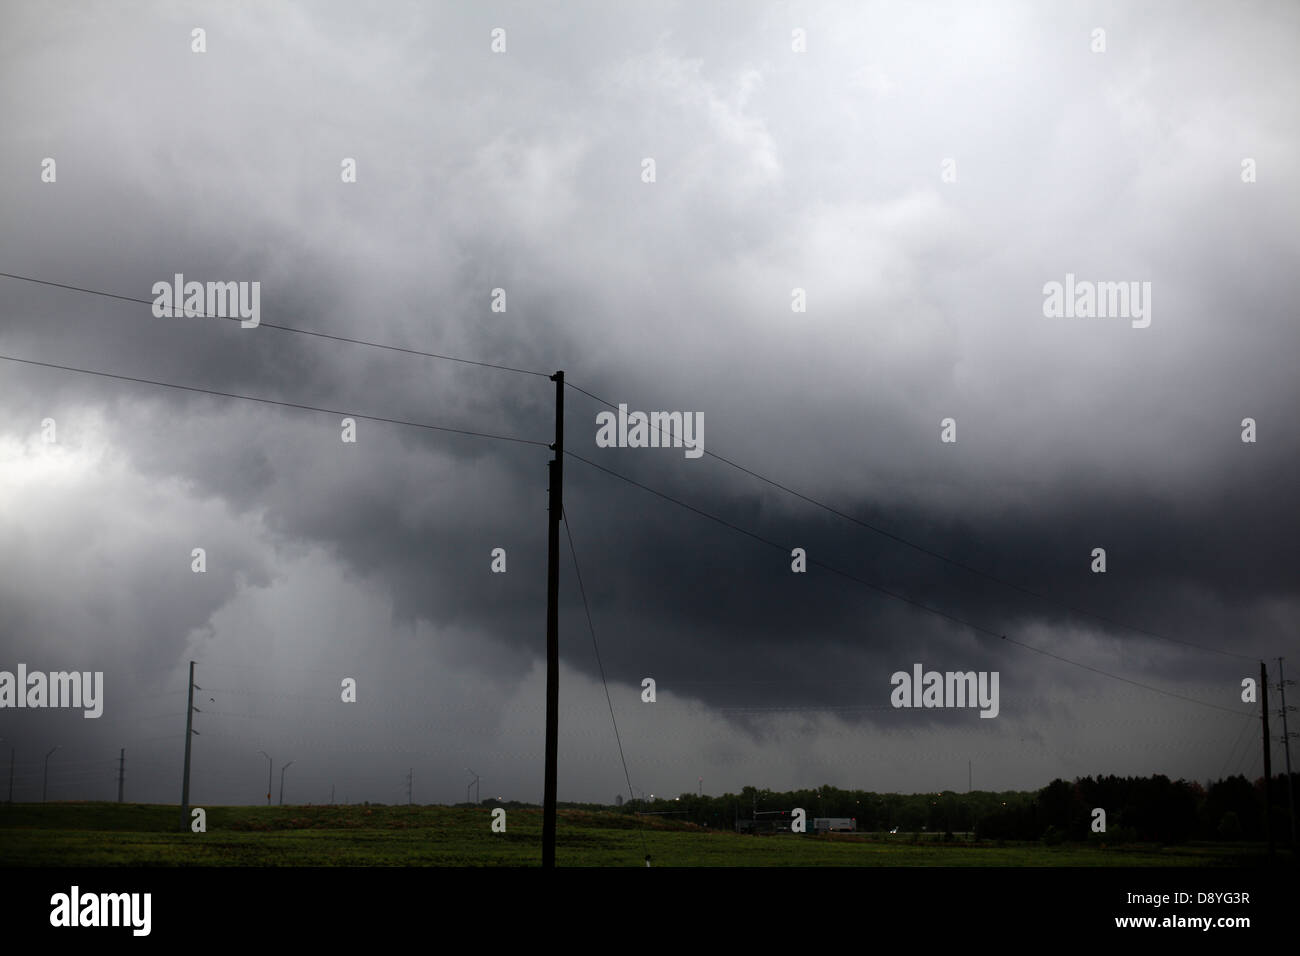 Very low wall cloud on a thunderstorm. Stock Photo